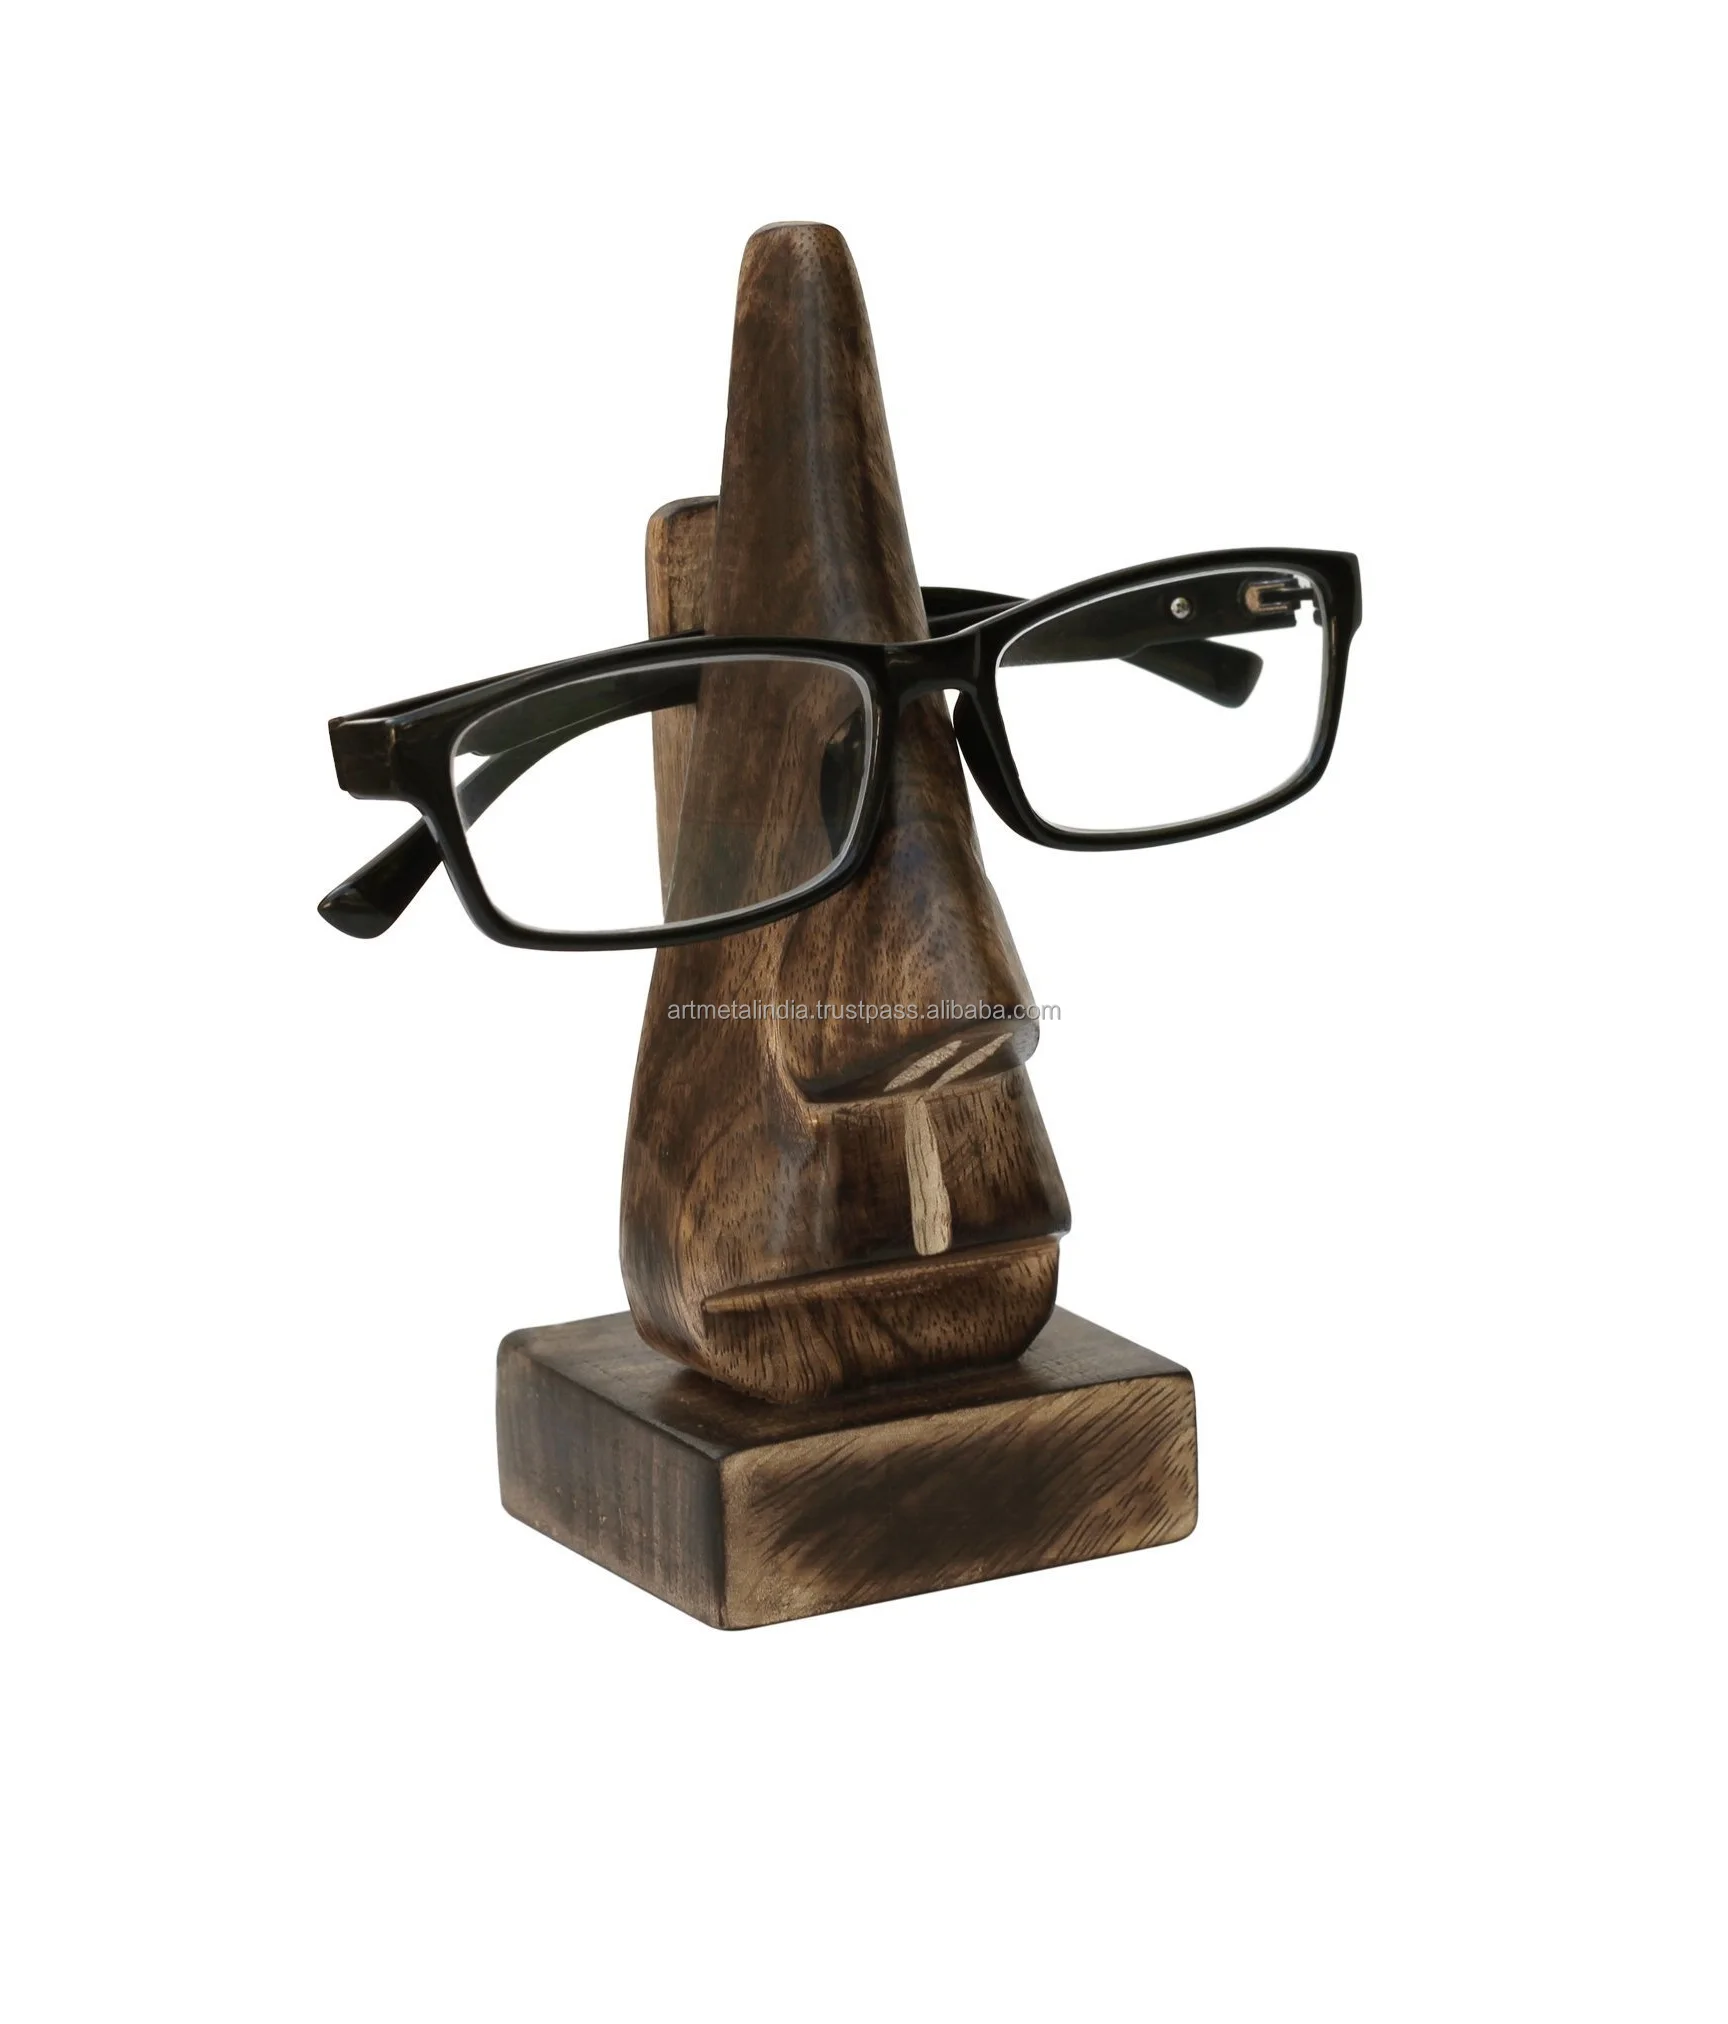 HIGH QUALITY WOODEN EYEGLASS STAND IN NEW STYLE WOODEN EYEGLASS STAND IN WHOLESALE PRICE